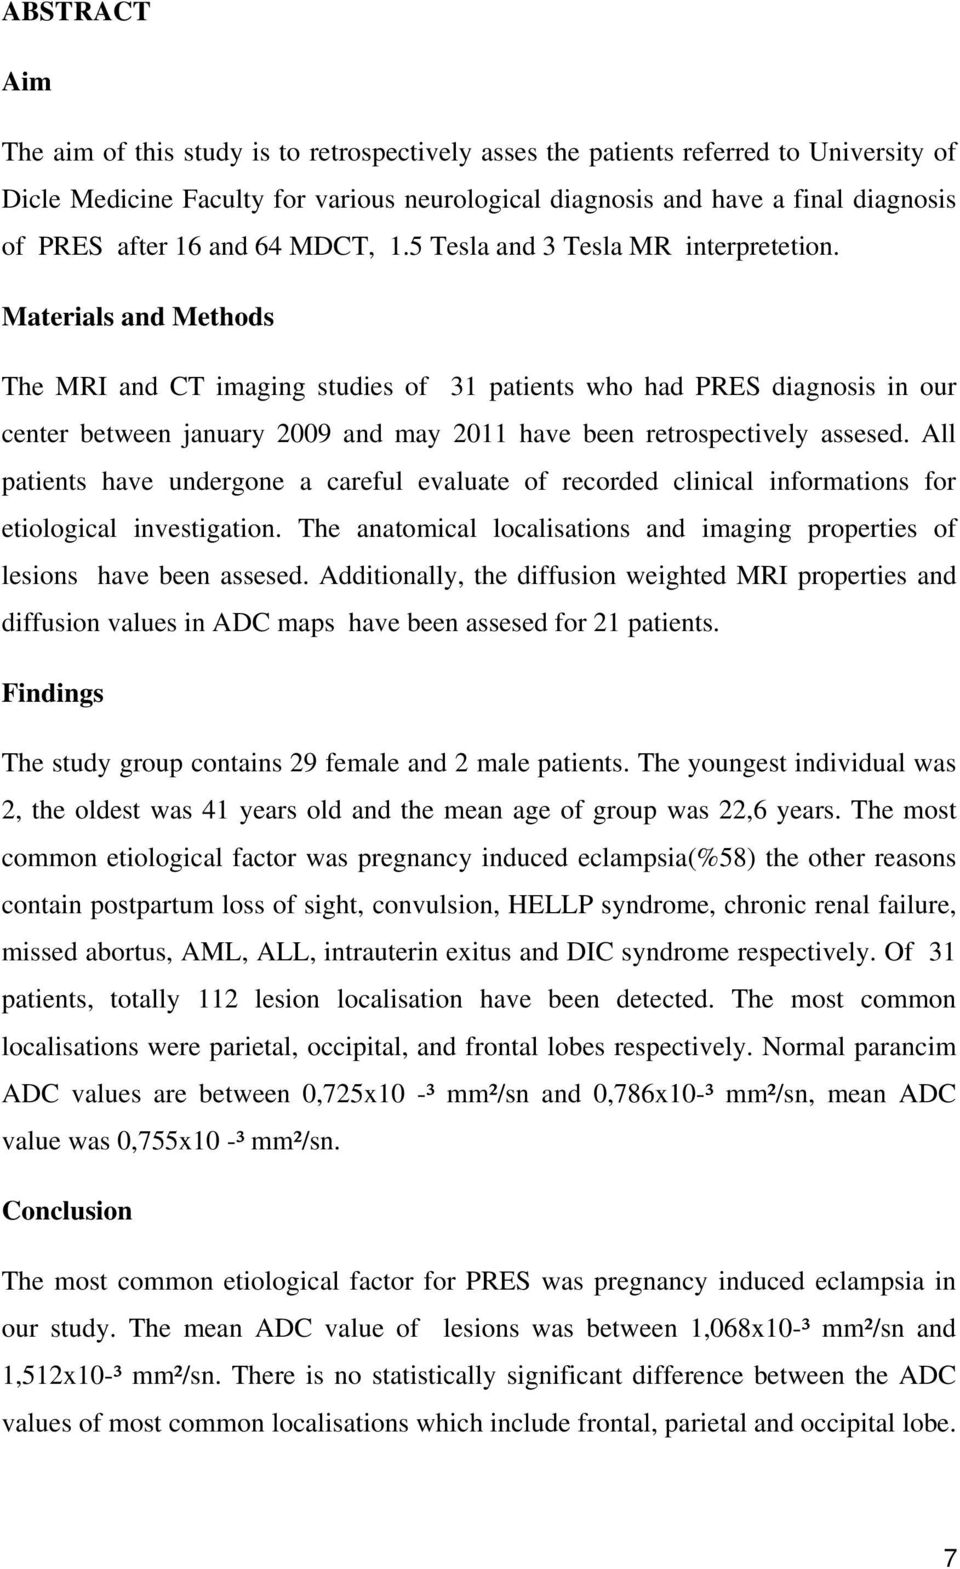 Materials and Methods The MRI and CT imaging studies of 31 patients who had PRES diagnosis in our center between january 2009 and may 2011 have been retrospectively assesed.